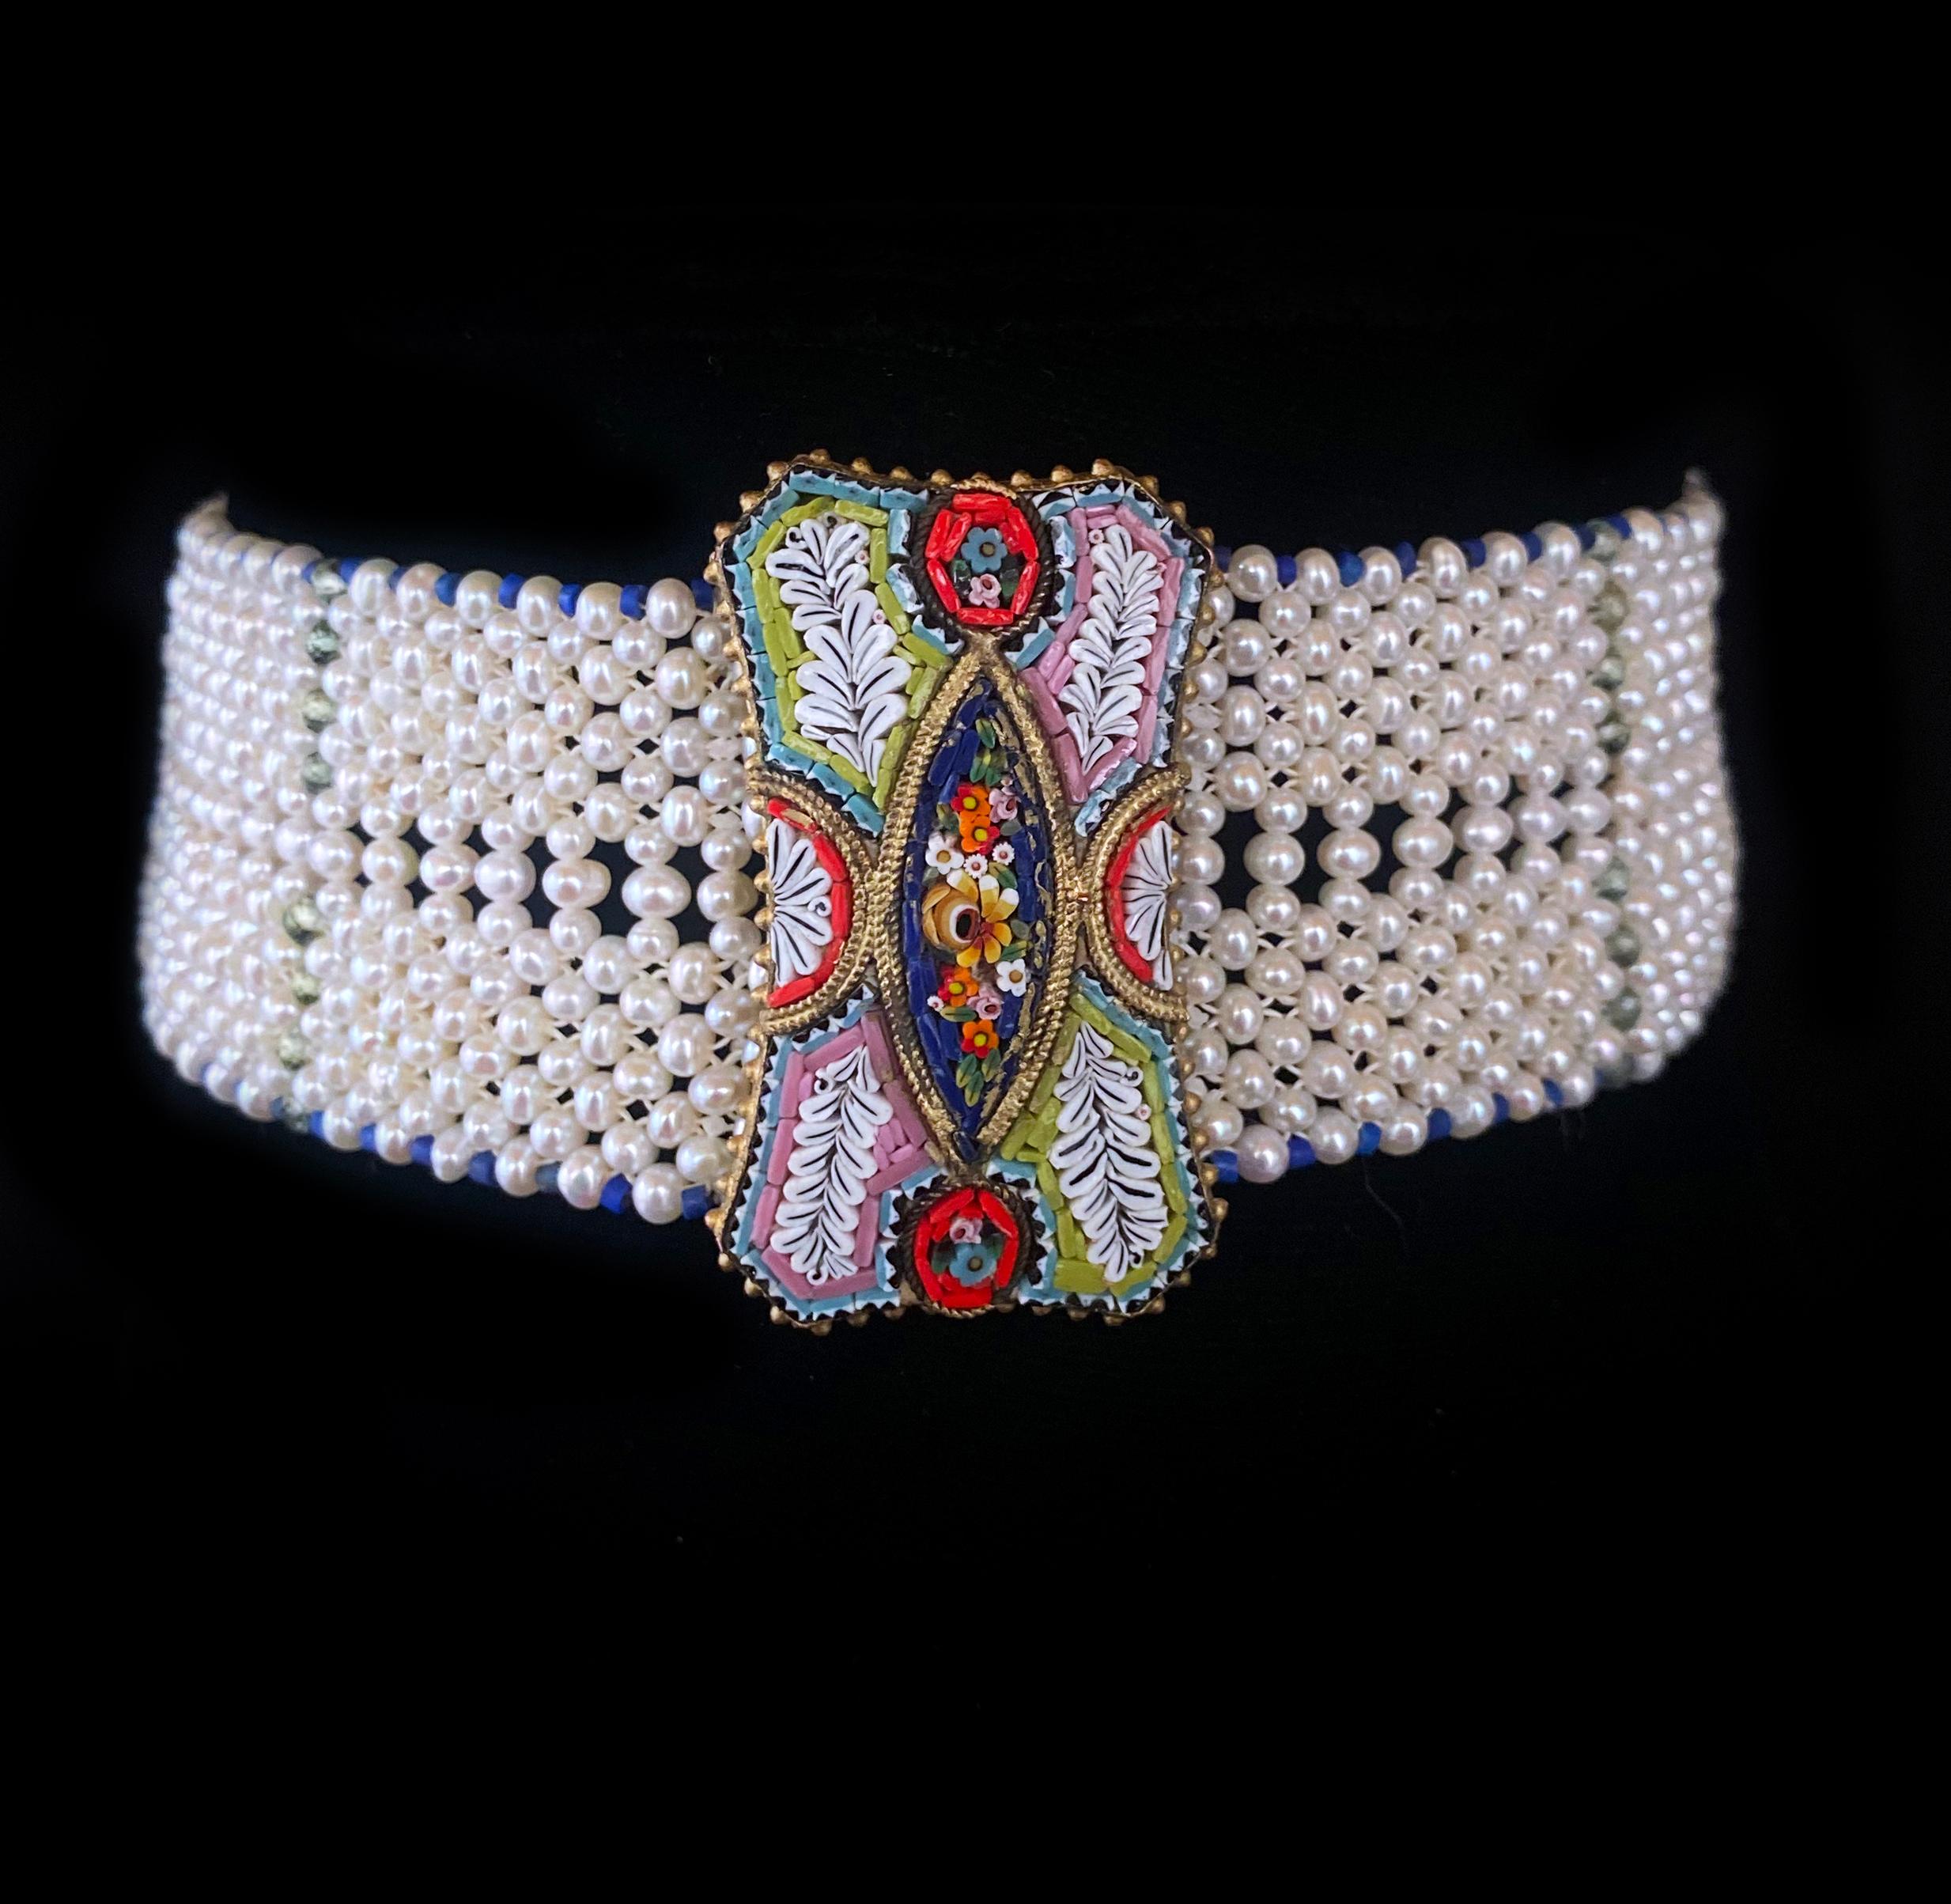 Beautiful piece made by Marina J. This lovely choker features high luster White Seed Pearls, all woven together into a fine lace like design. The Pearl band is adorned in beautiful Lapis Lazuli and Green Apatites which perfectly match the